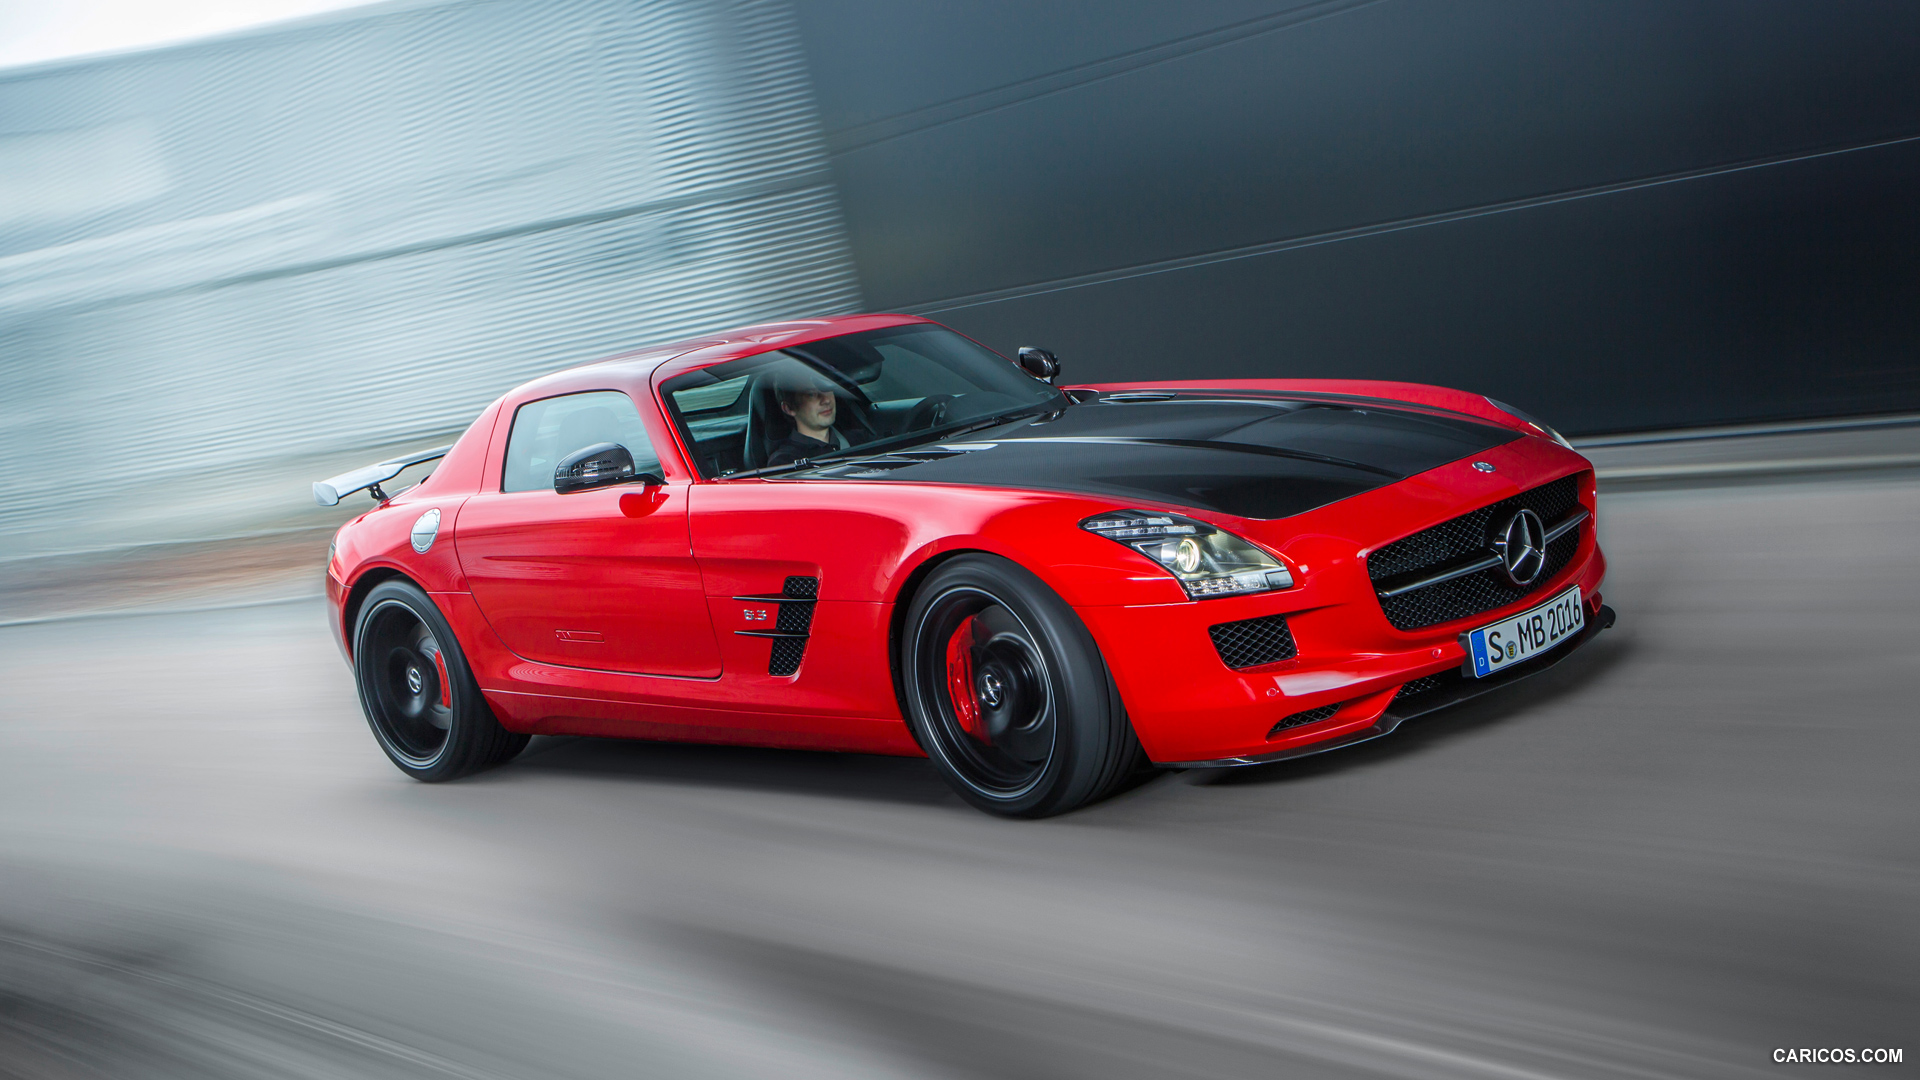  2015 Mercedes-Benz SLS AMG GT Coupe Final Edition - Side, #21 of 41